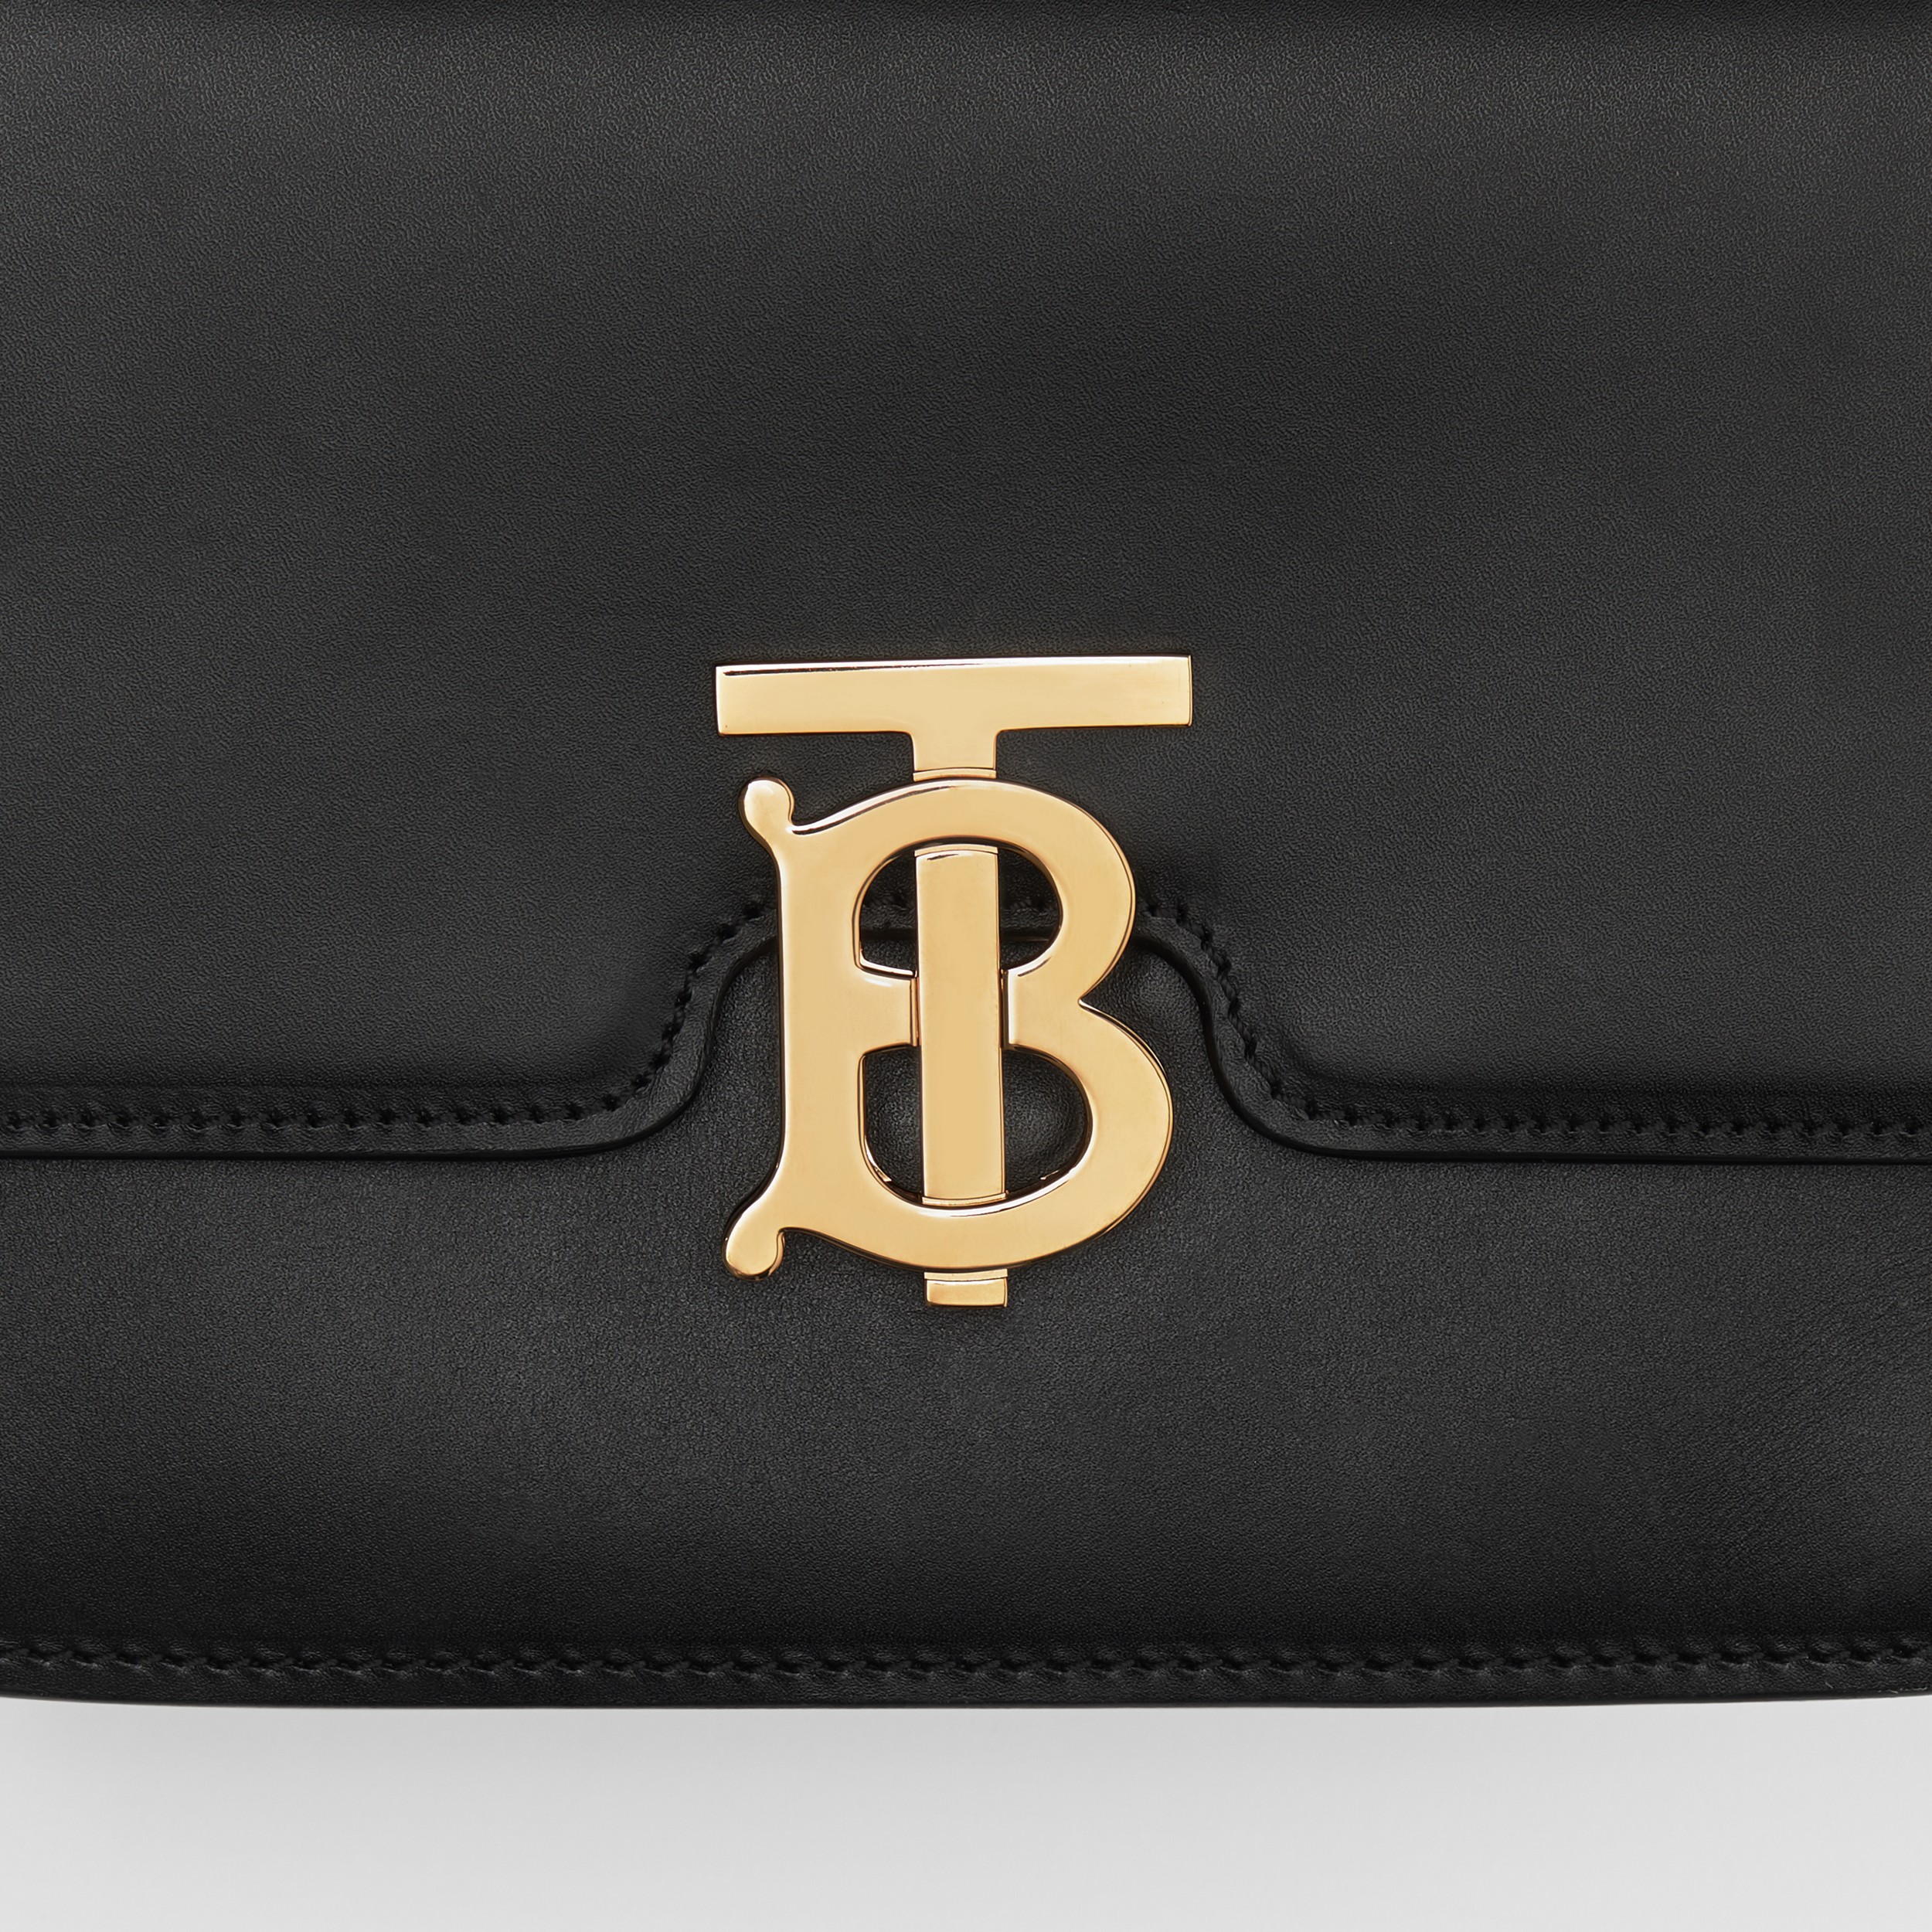 Small Leather TB Bag in Black - Women | Burberry United States